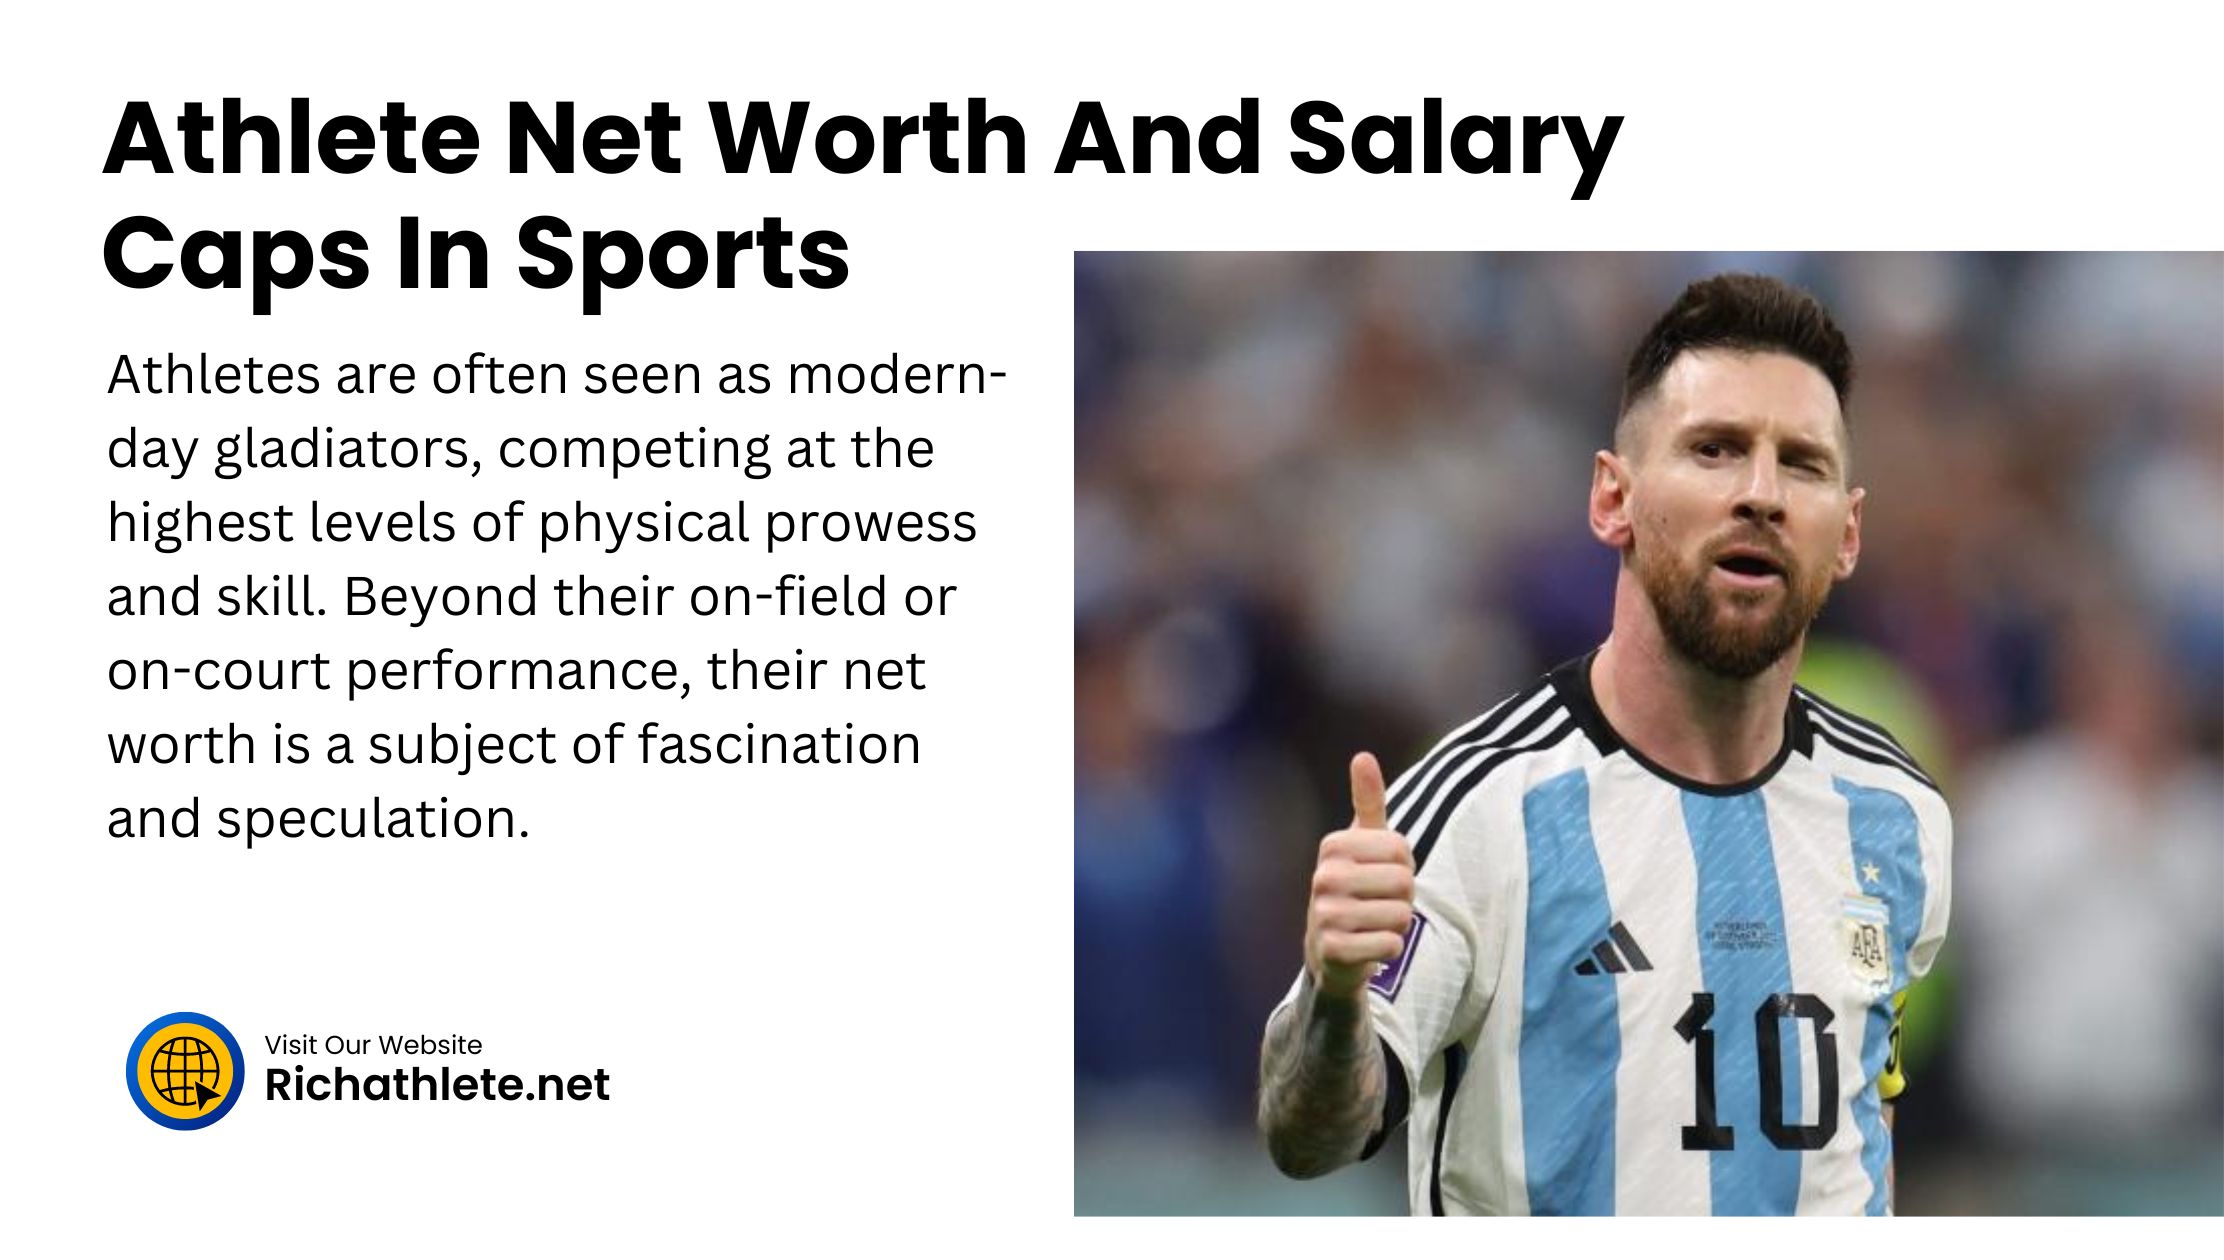 Athlete Net Worth And Salary Caps In Sports